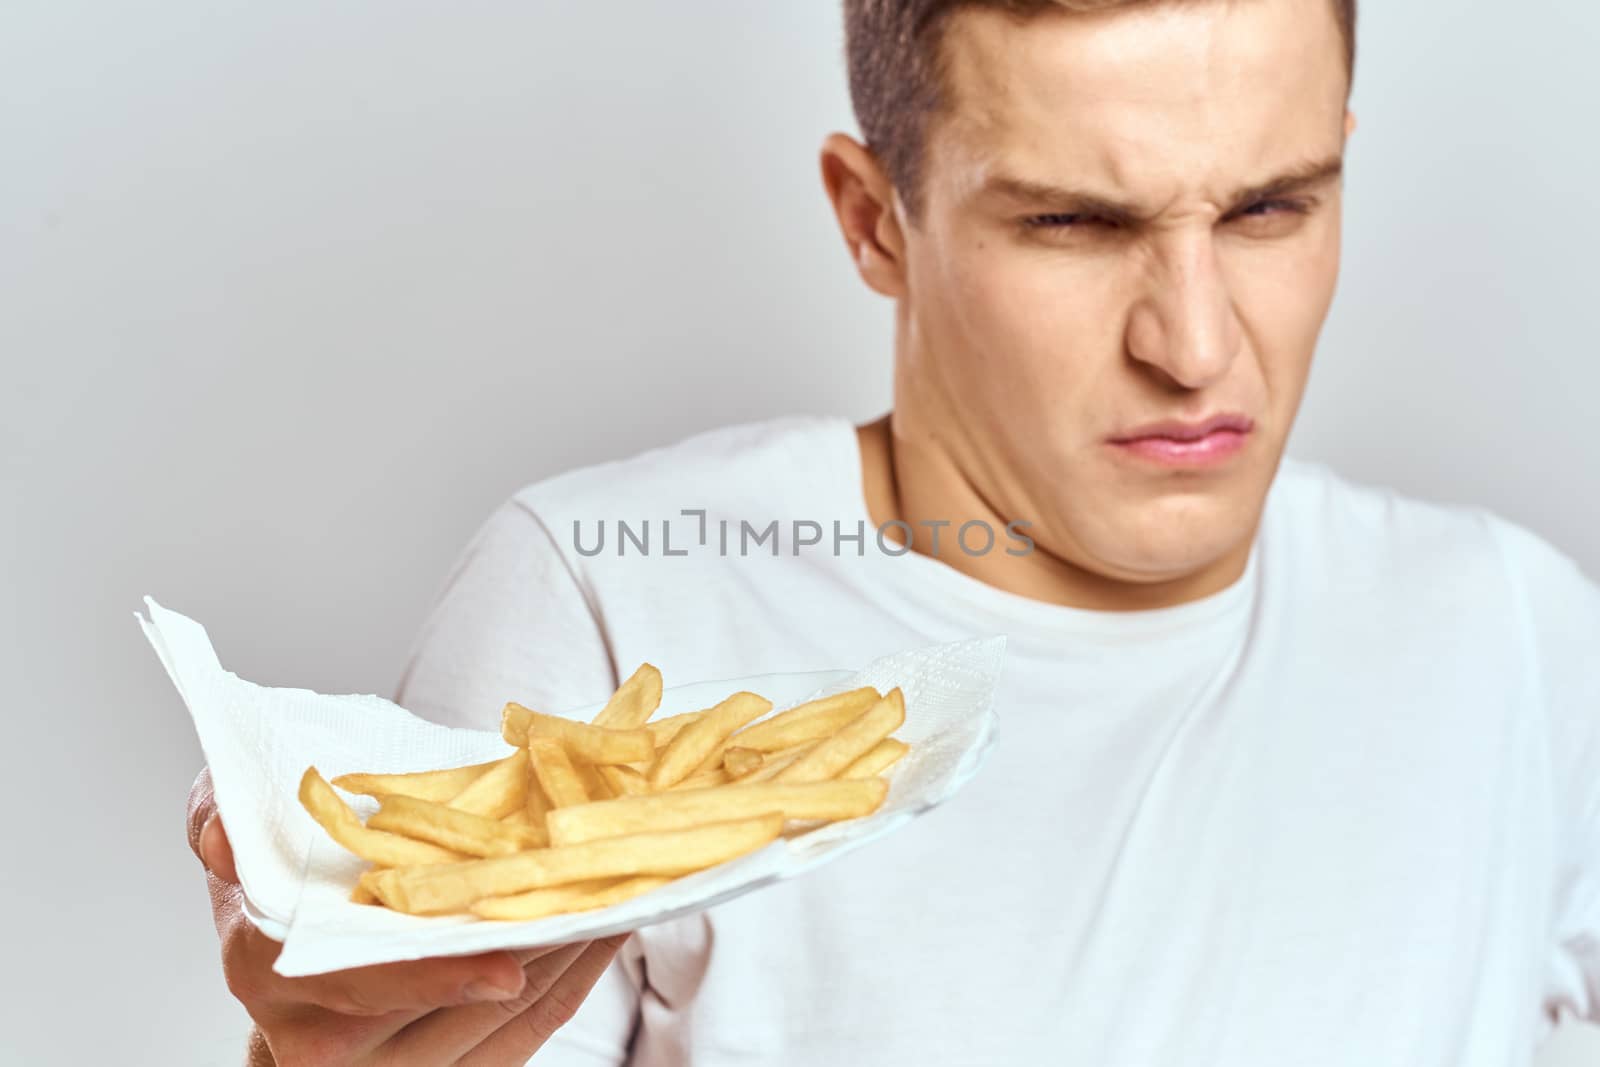 young guy with french fries in a box and in a white t-shirt on a light background cropped view. High quality photo